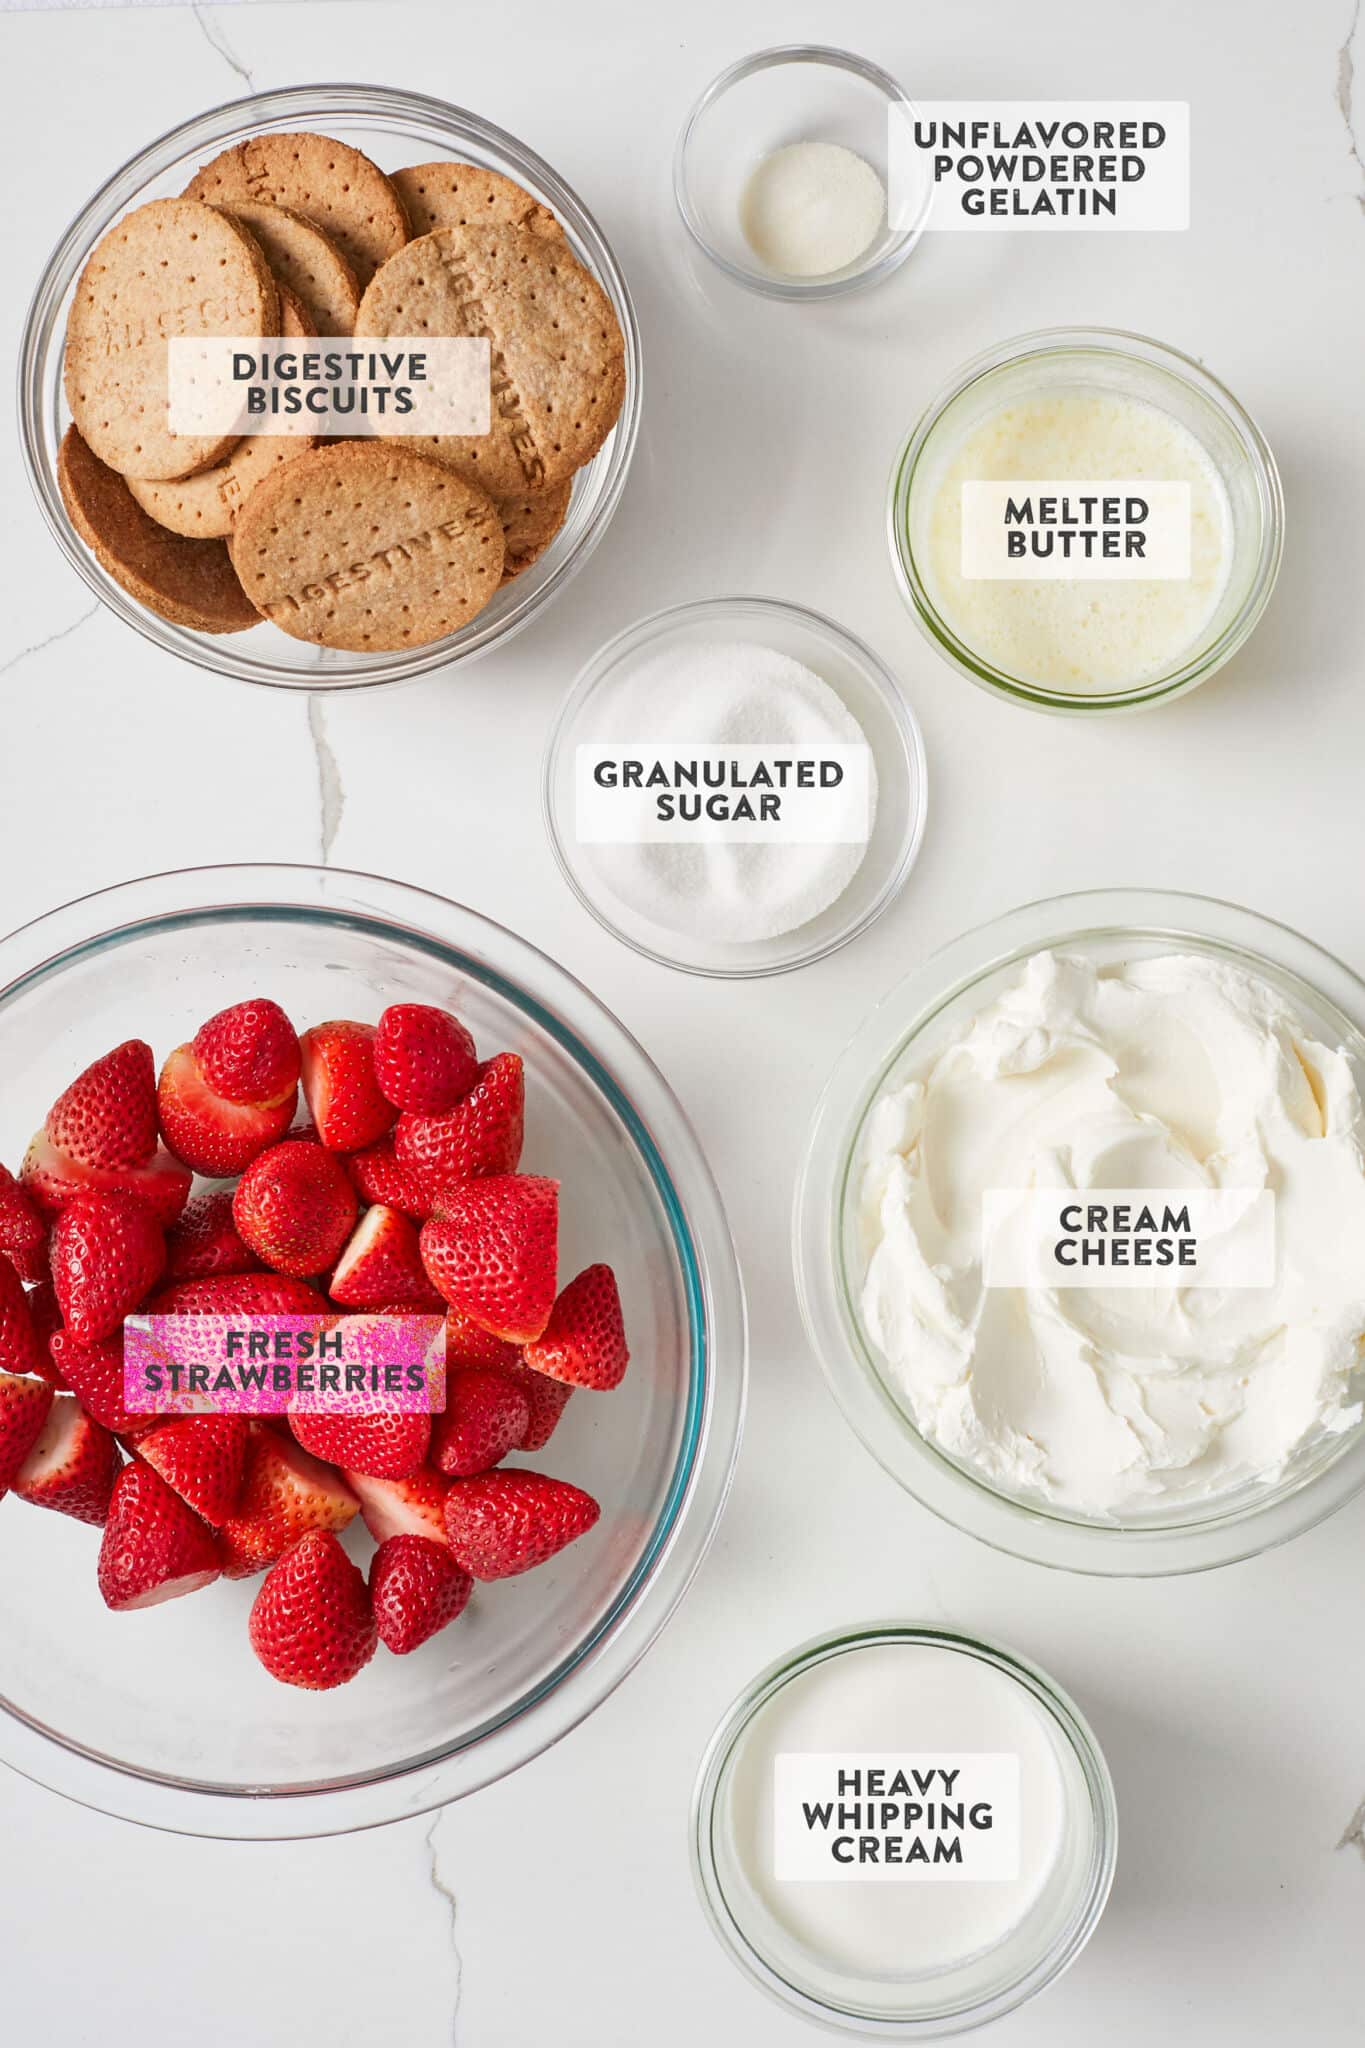 Ingredients for No-Bake Strawberry Cheesecake recipe.